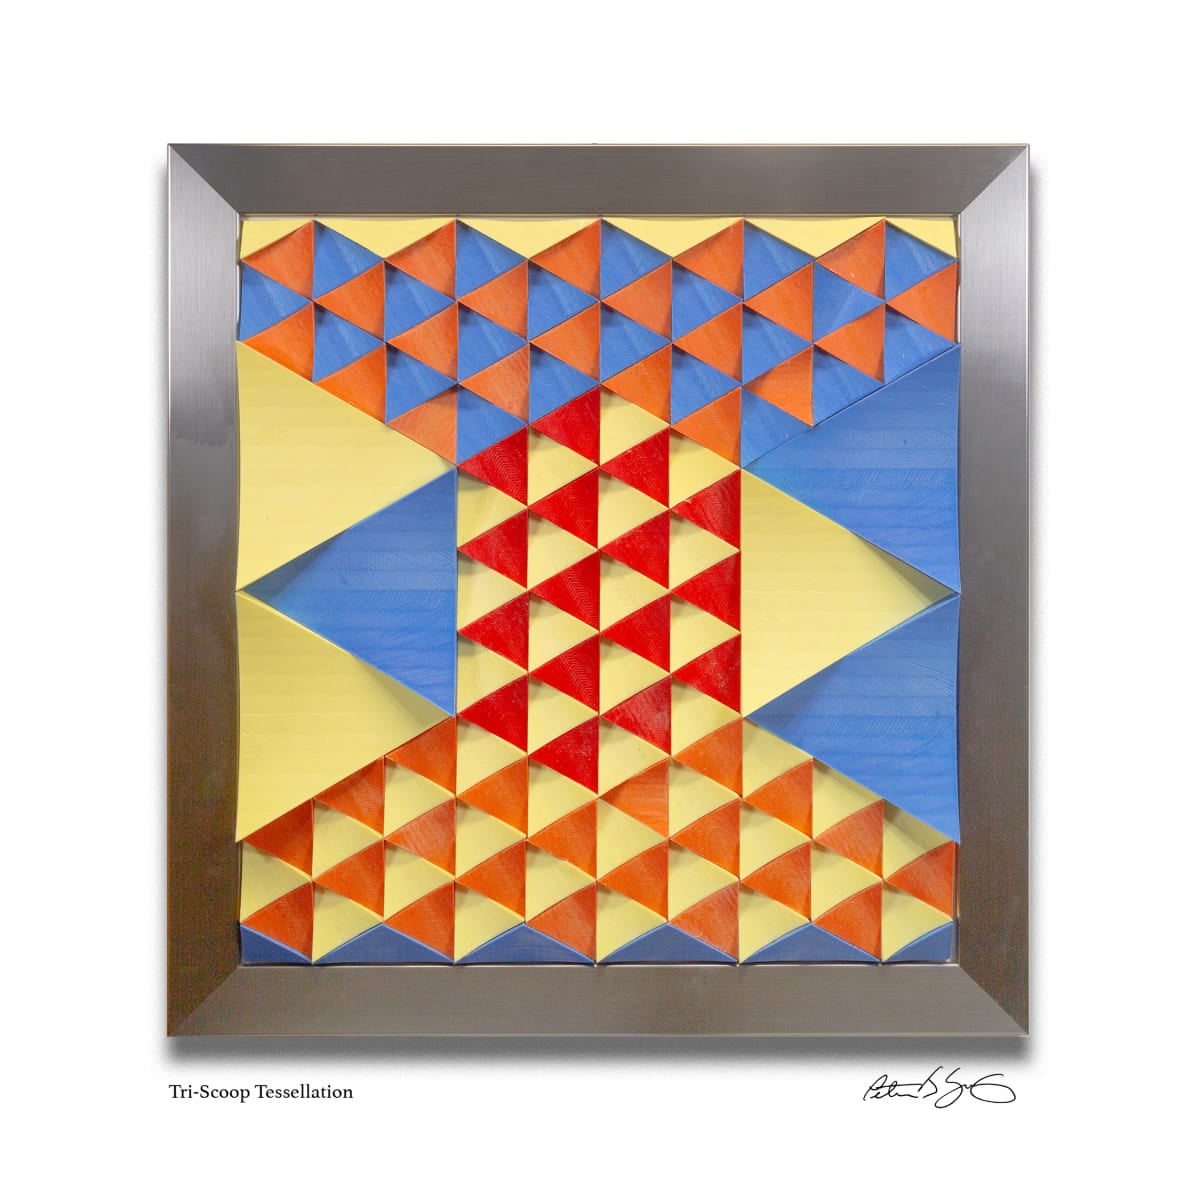 Tri-Scoop Tessellation by Peter J Sucy Digital Arts  Image: "Dorito Abstract"